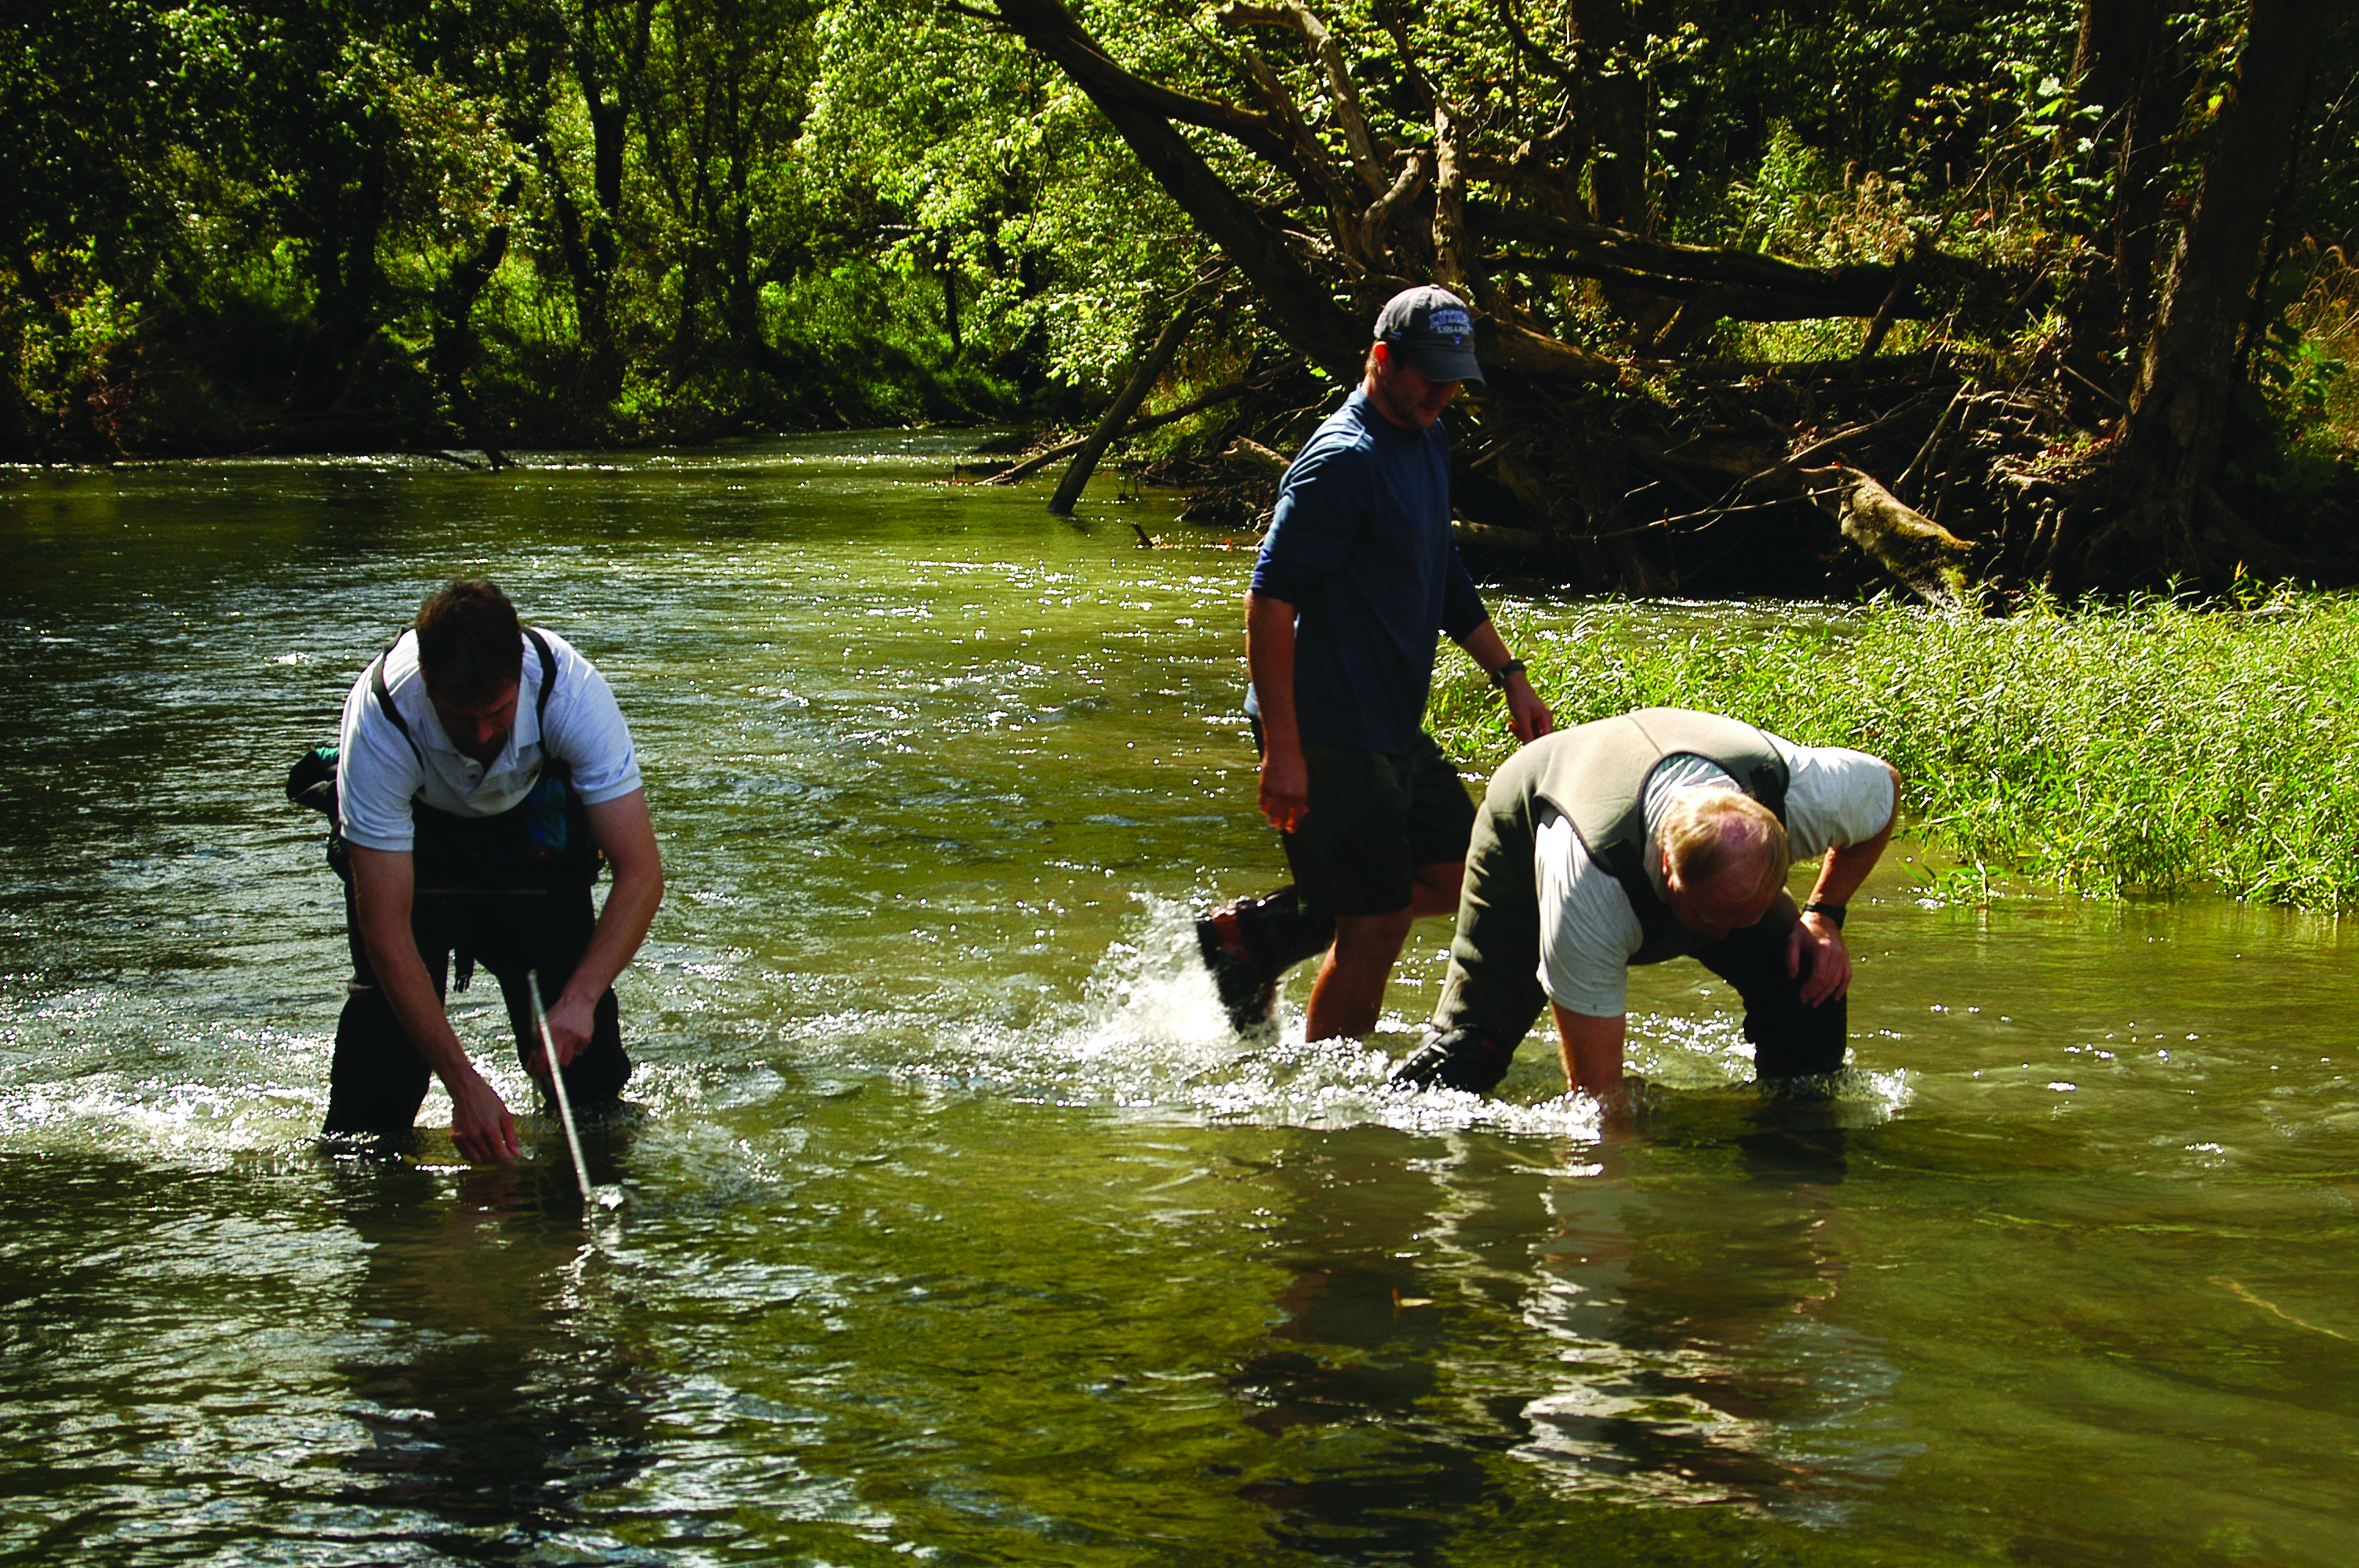 Three agency staff members place mussels into a river.